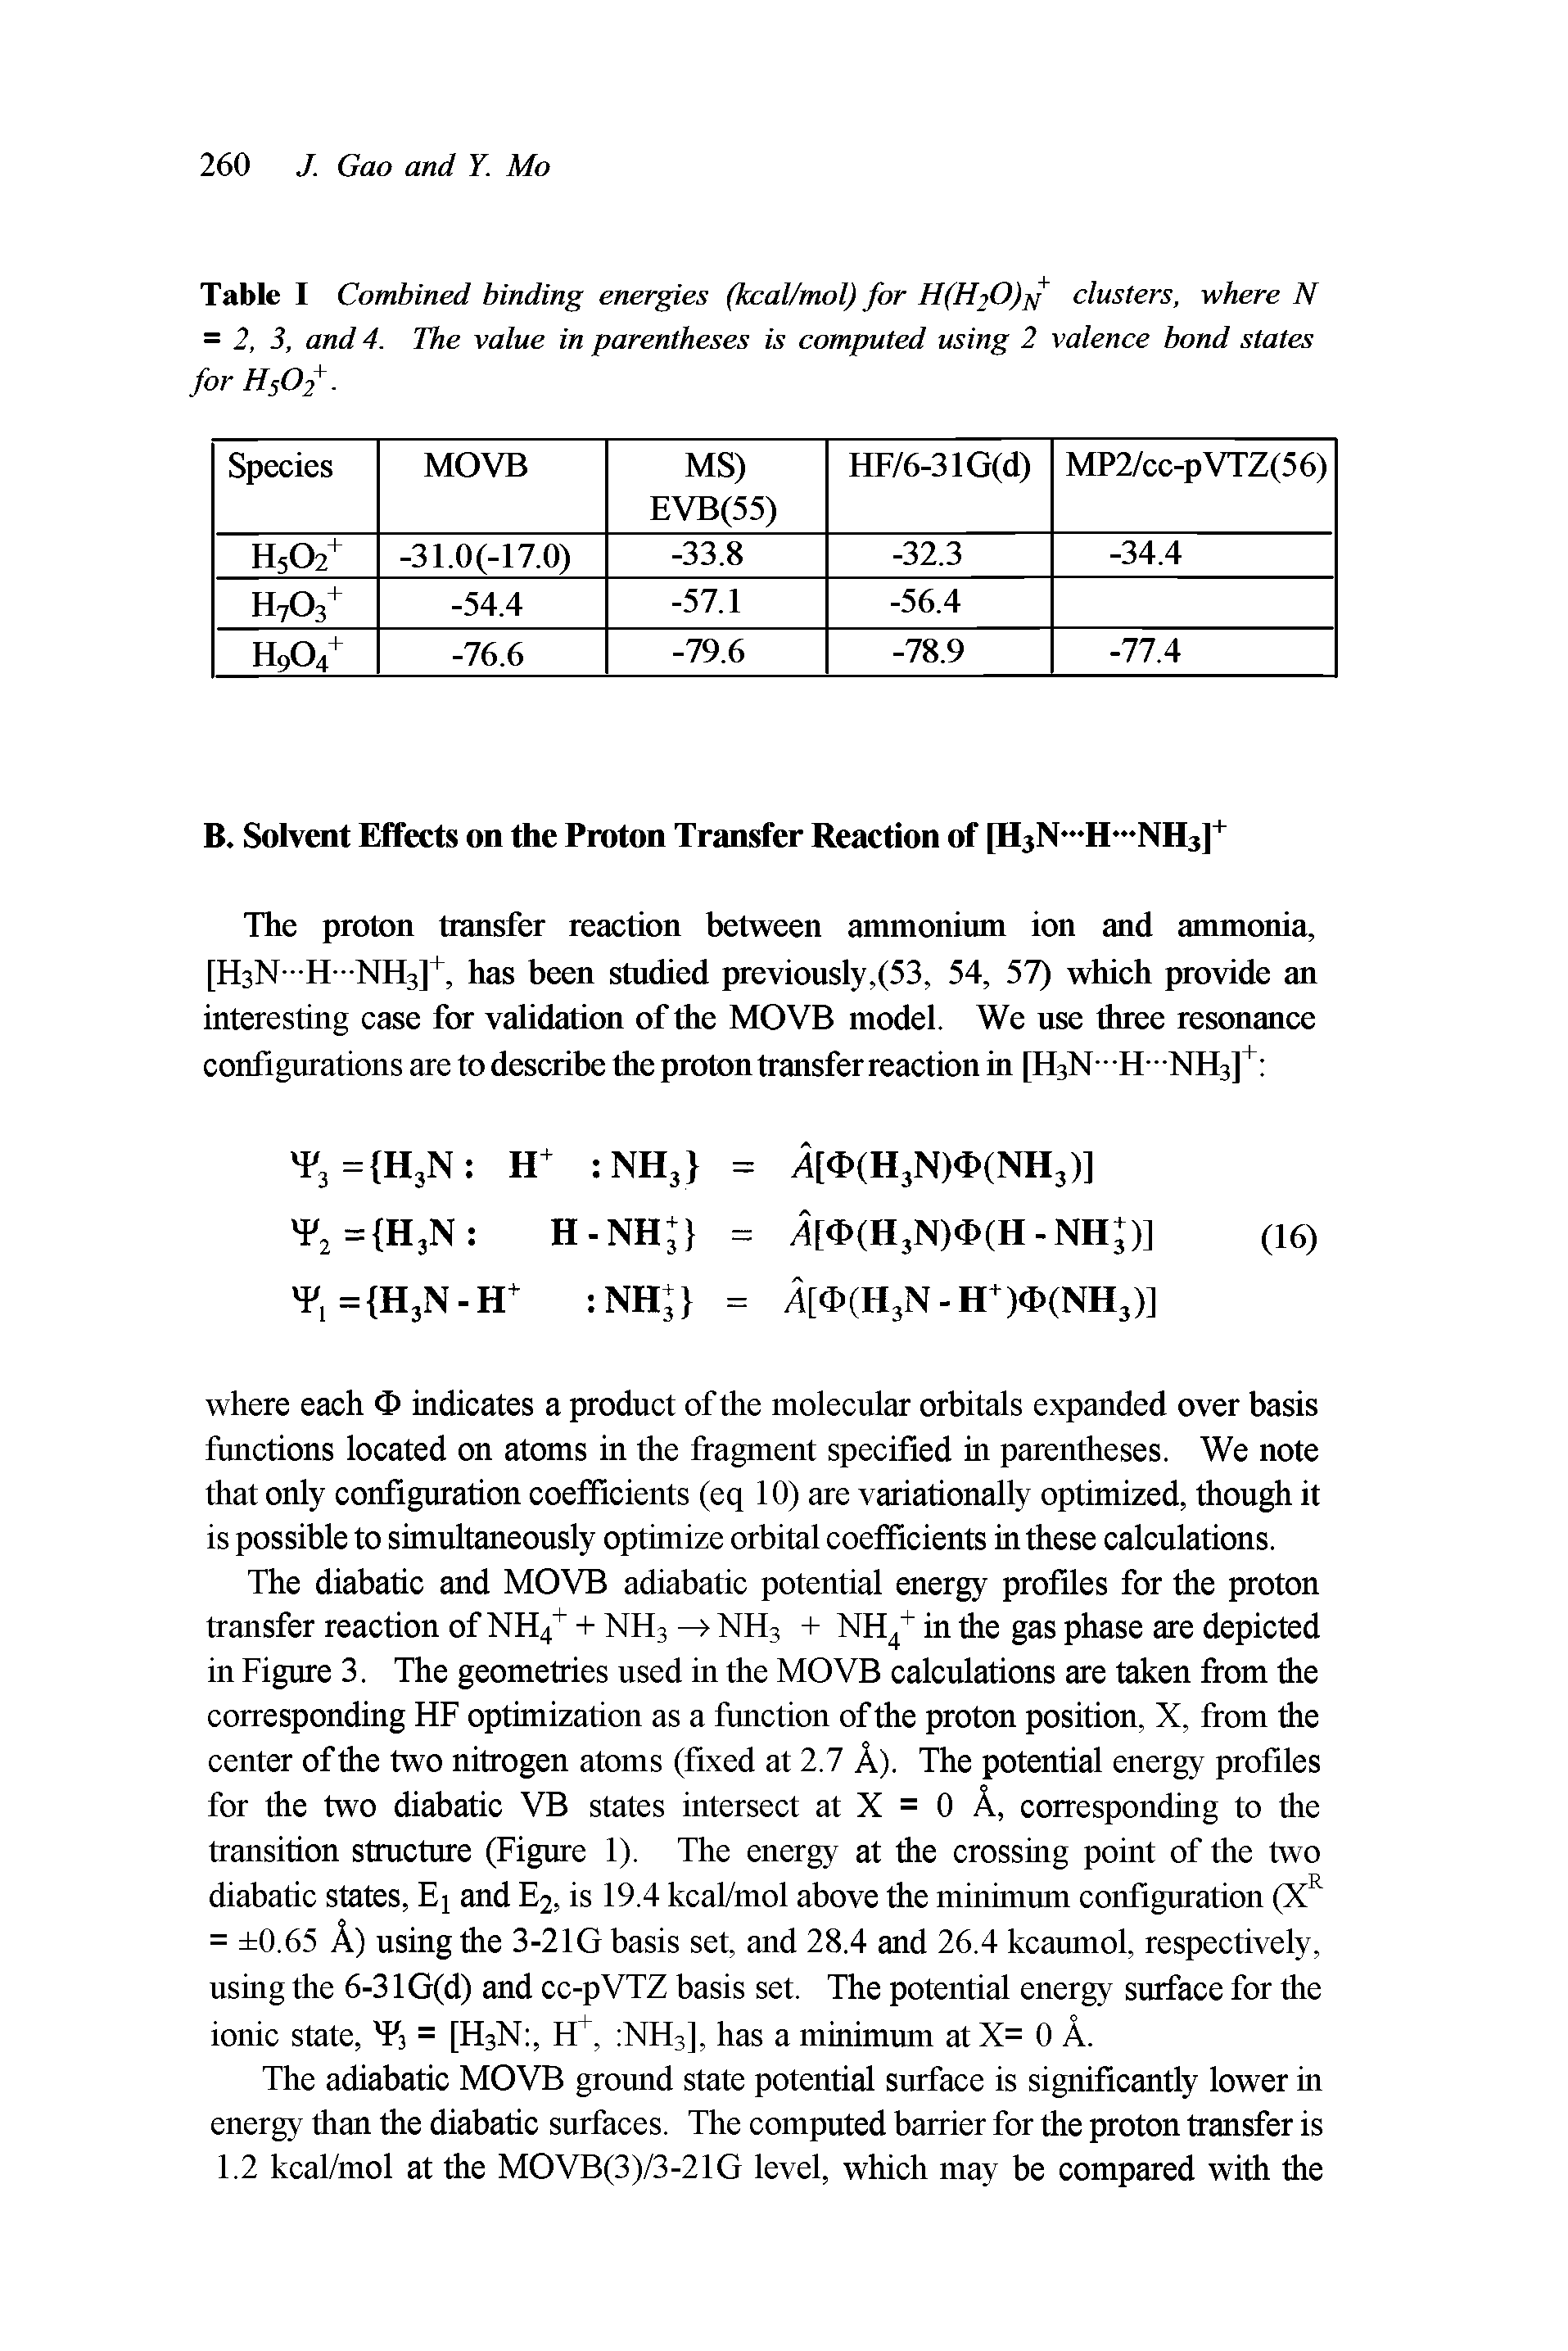 Table I Combined binding energies (kcal/mol) for H(H20)jf clusters, where N = 2, 3, and 4. The value in parentheses is computed using 2 valence bond states for HsOf".